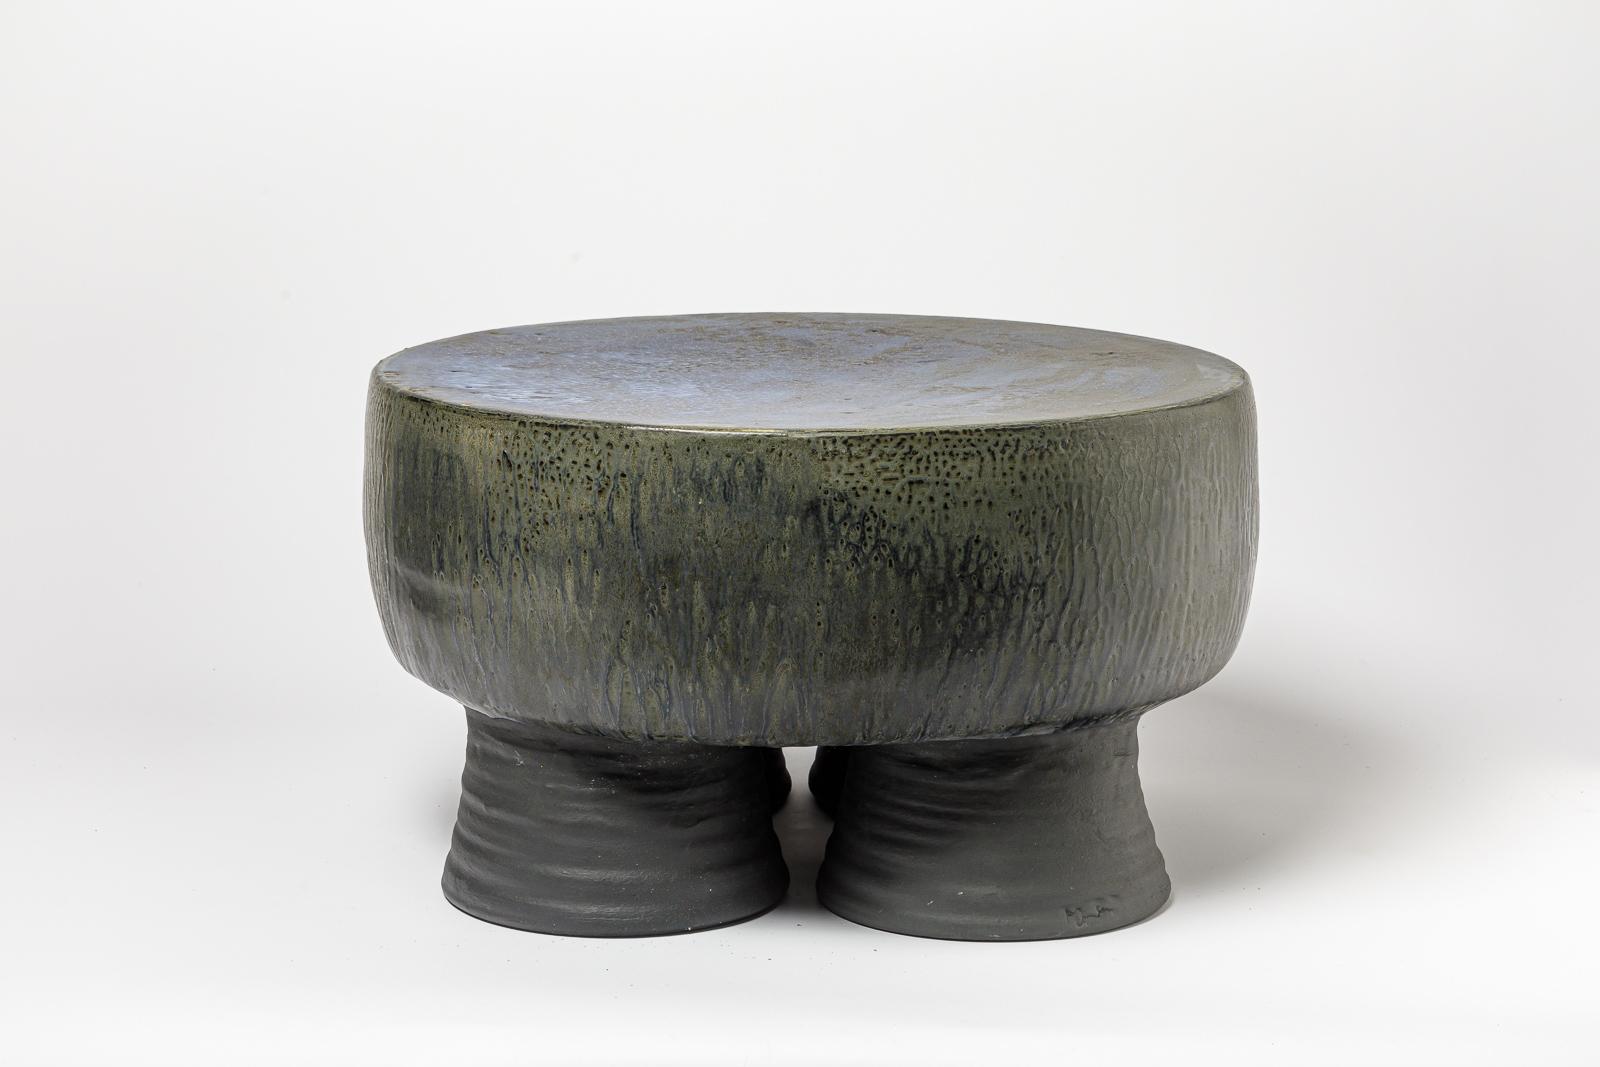 Black/blue and grey/green glazed ceramic stool or coffee table by Mia Jensen. 
Artist signature under the base. 2023.
H : 12.2’ x 21.3’ inches.